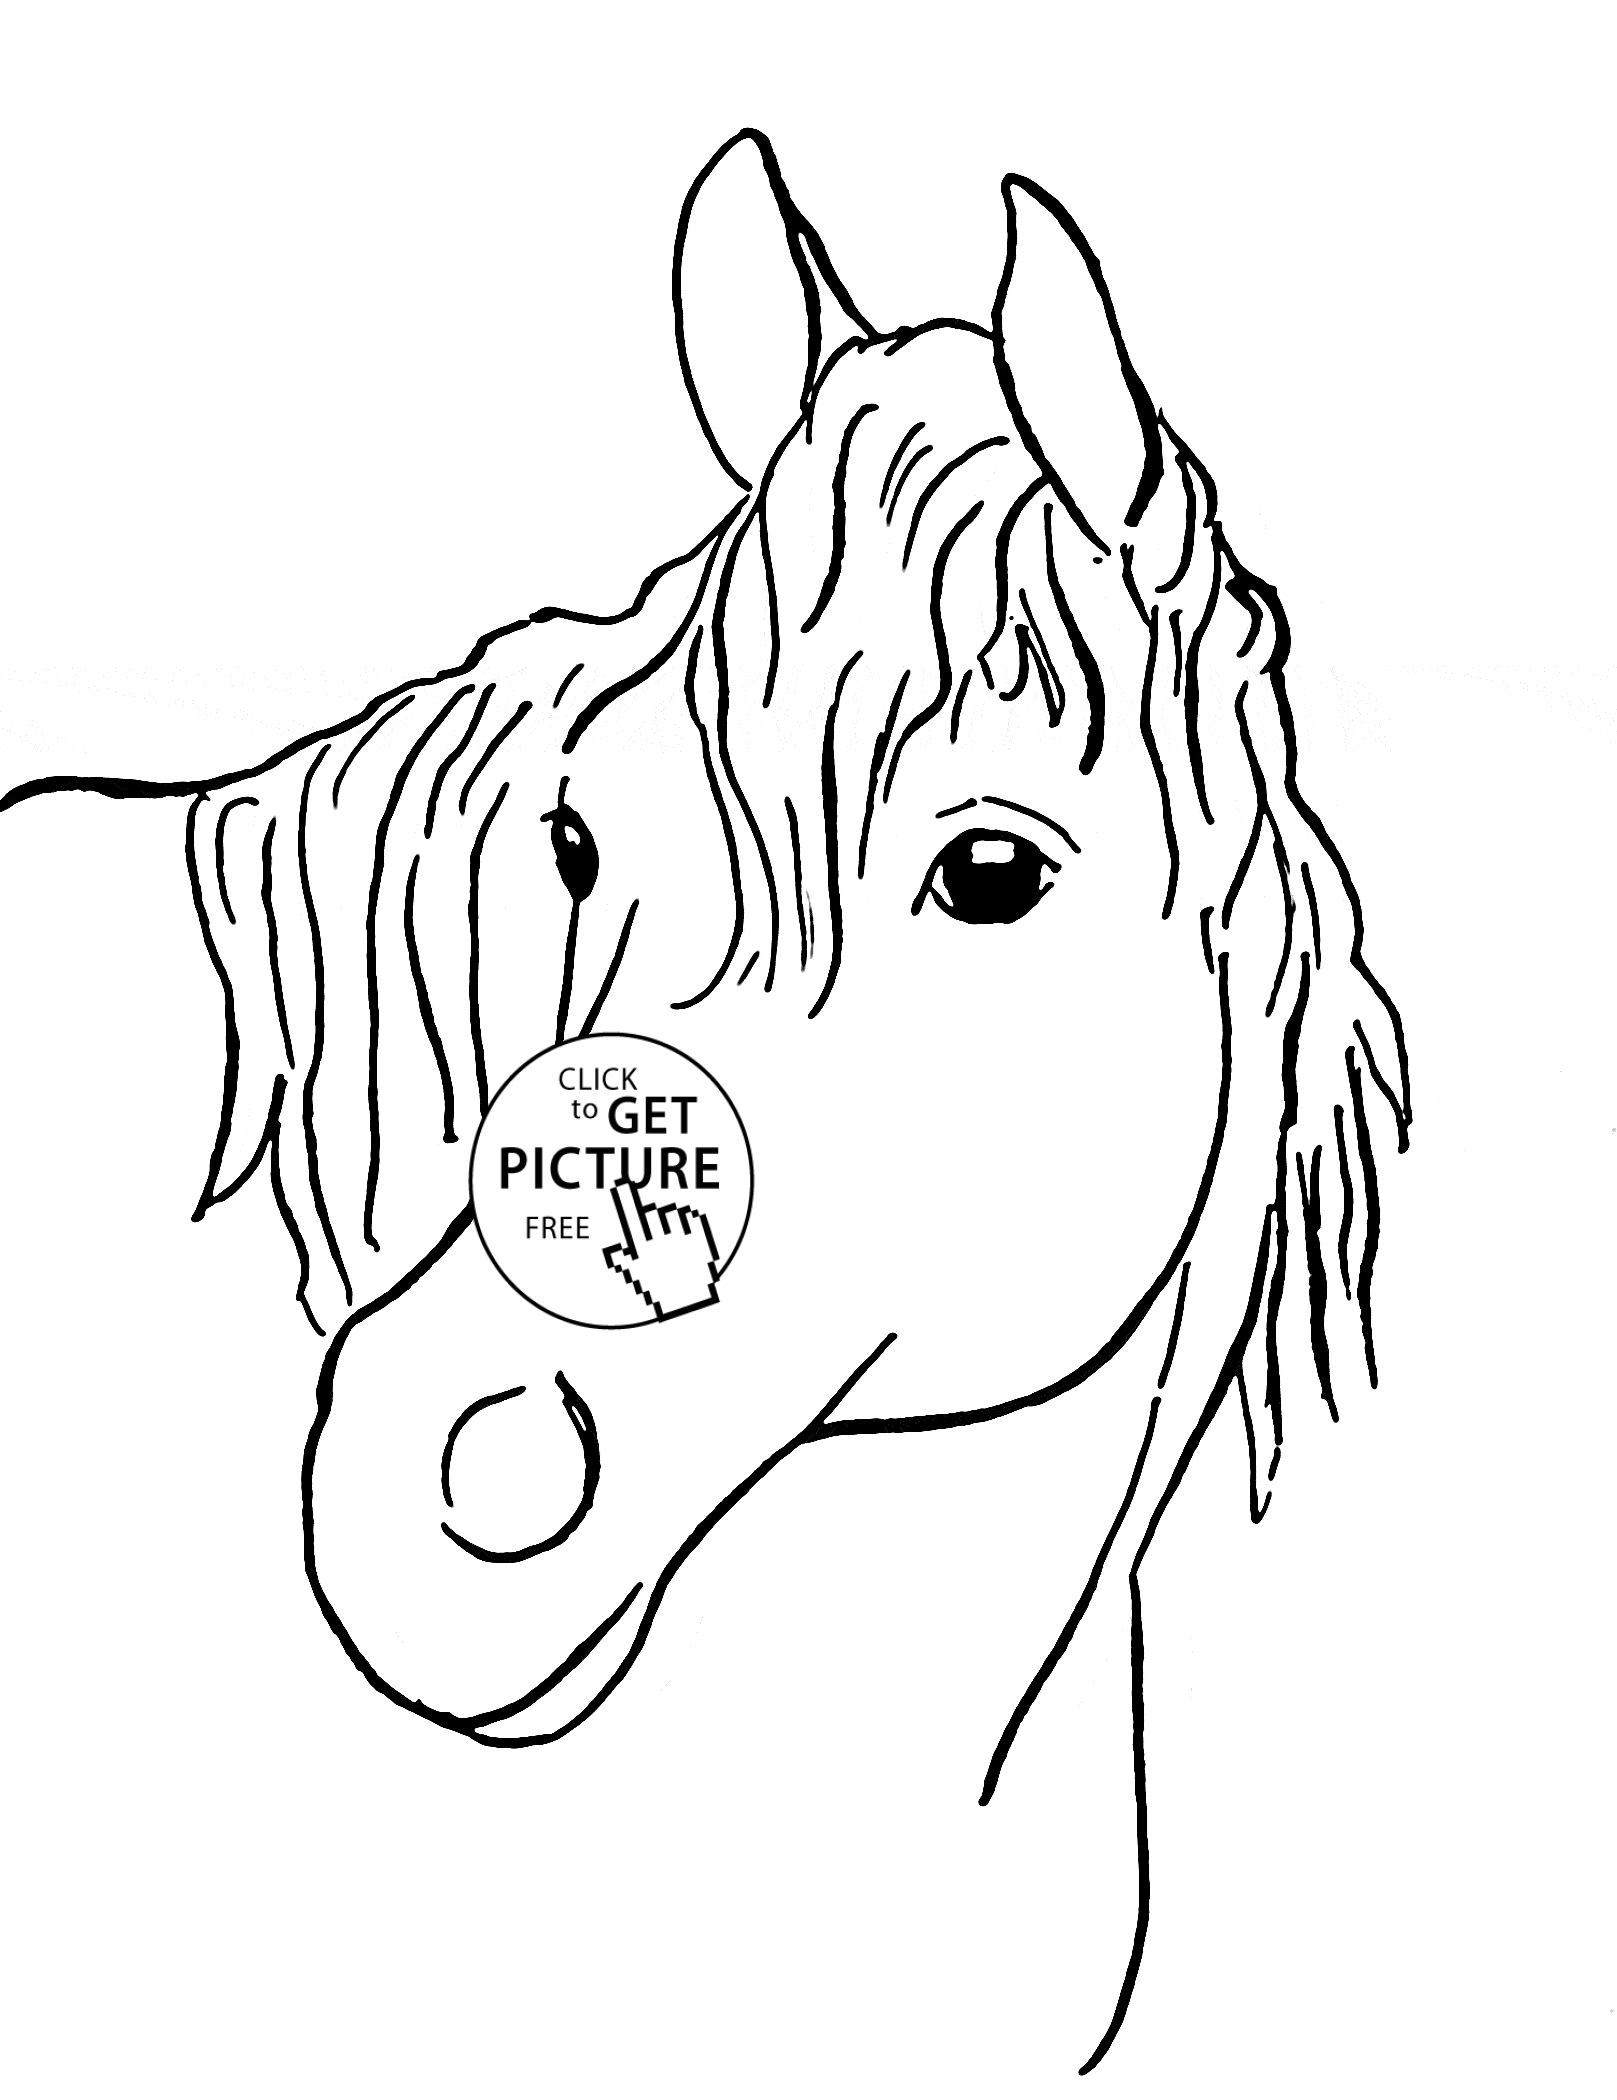 horse face coloring page horse coloring pages coloring pages to download and print page coloring horse face 